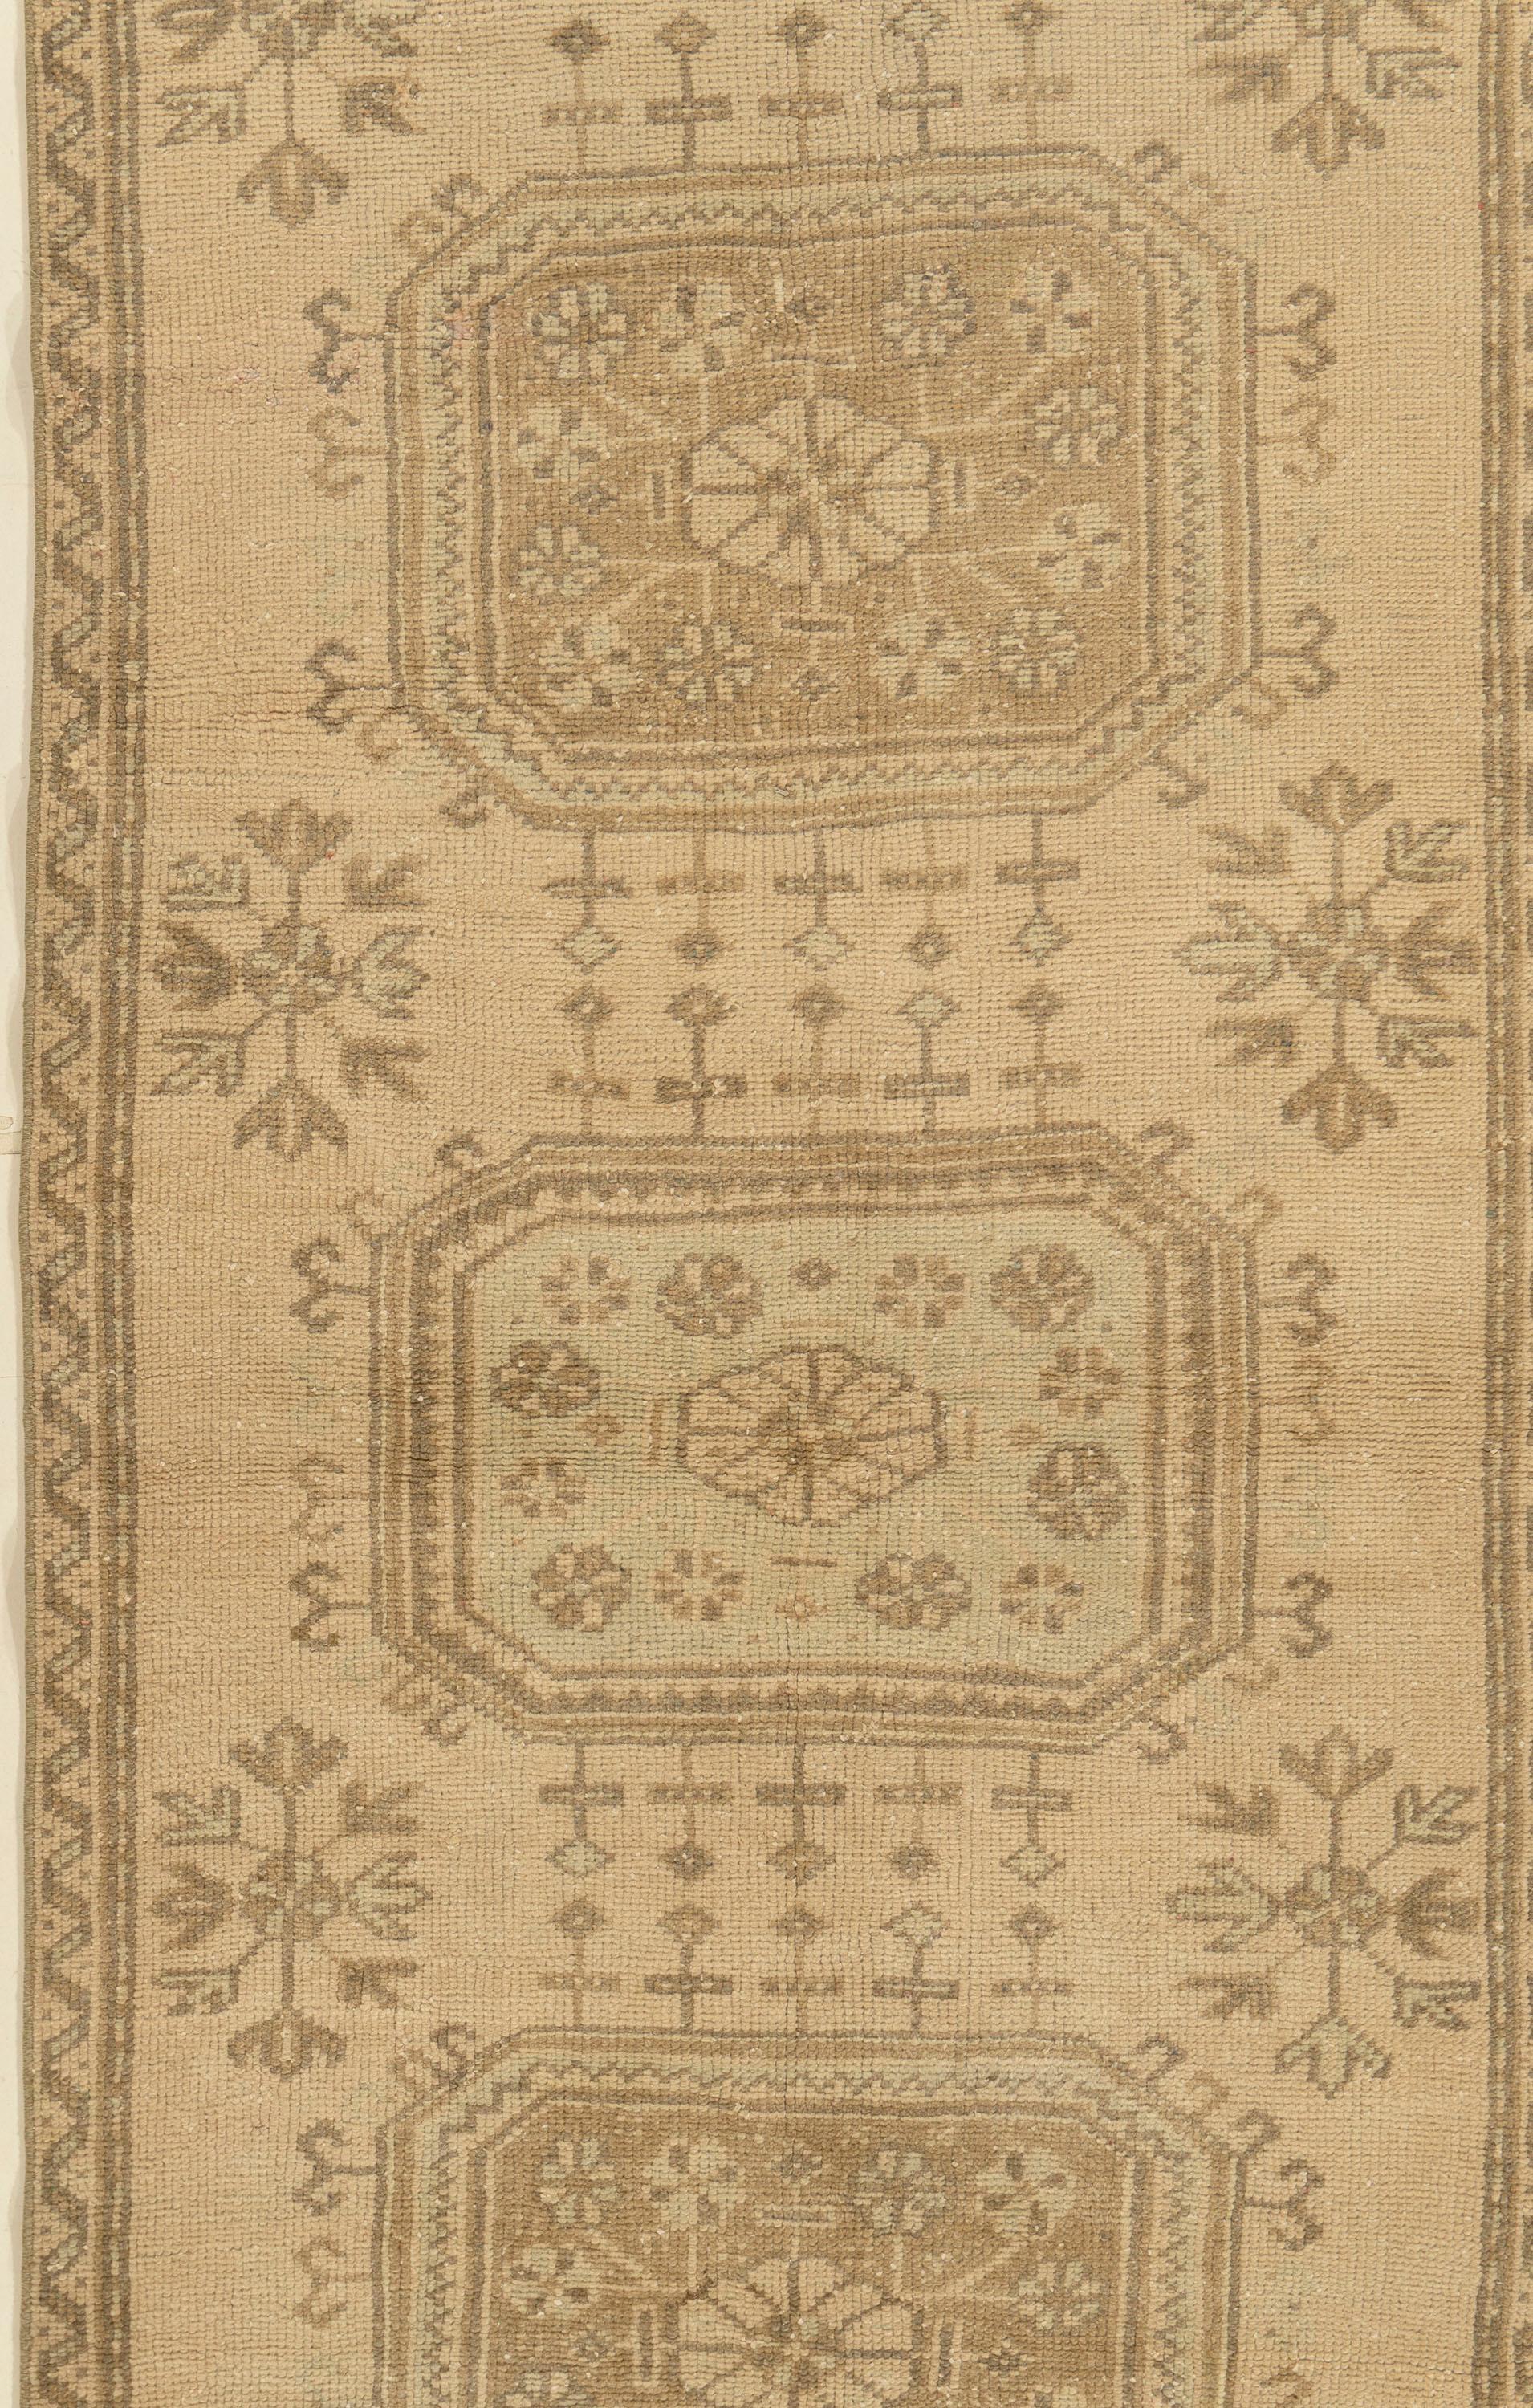 Vintage Turkish Oushak Runner 3'3 x 11'3. Even today, Oushak rugs are still the first choice of professional interior designers. Sometimes this is because when grading Oushak carpets, carpet connoisseurs will not only look at the overall quality of